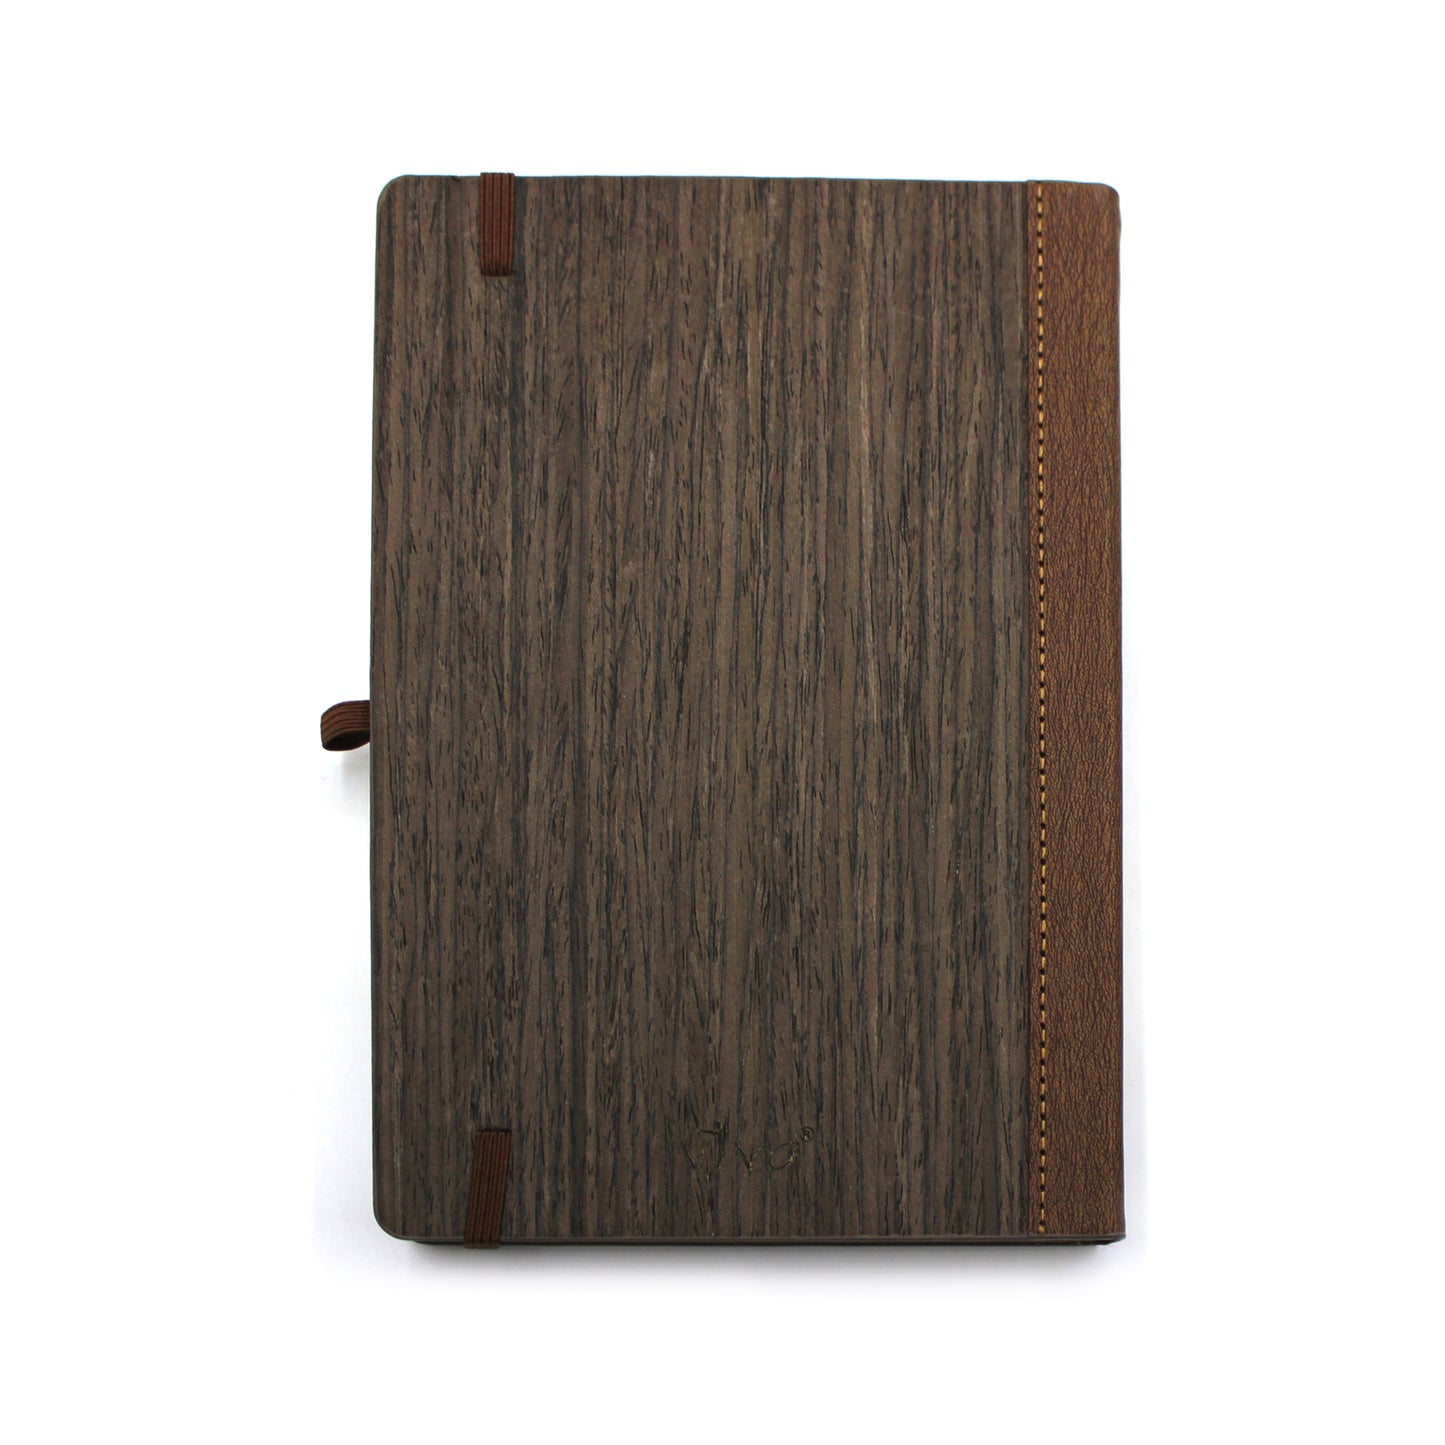 WOODY Notebook Made from Natural Wood (Dark Brown)